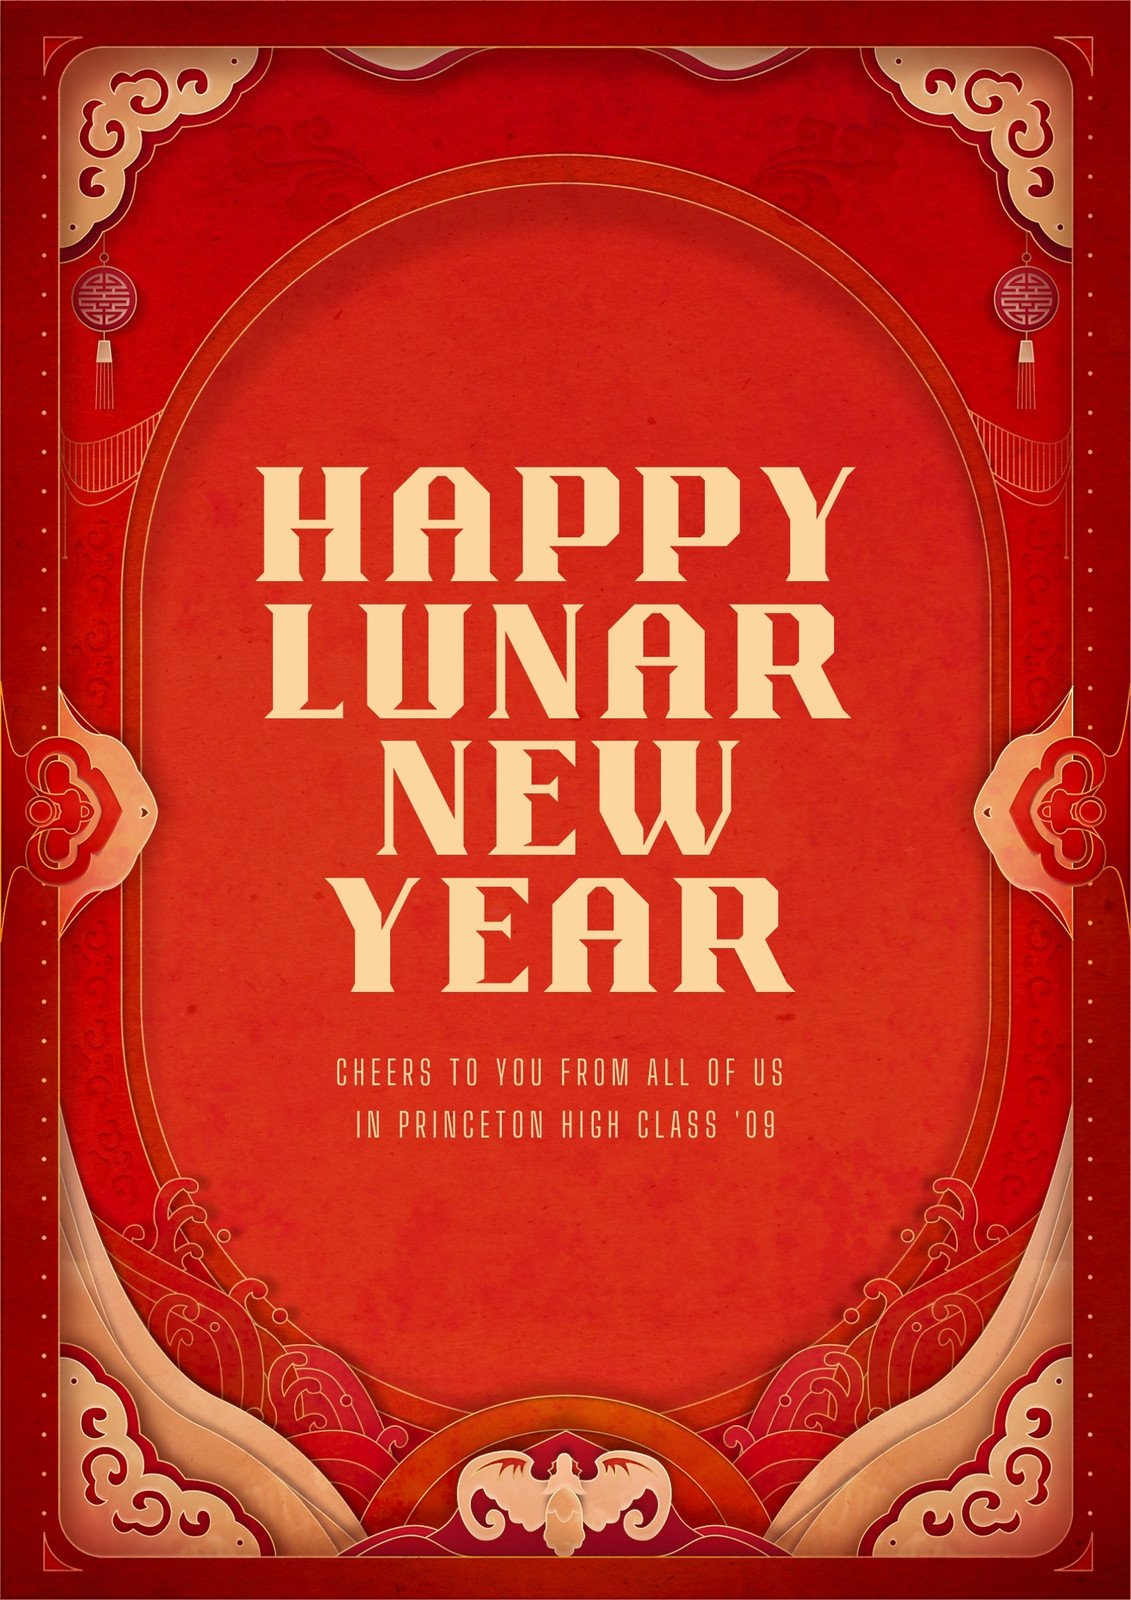 Why Was Lunar New Year Created - Image to u